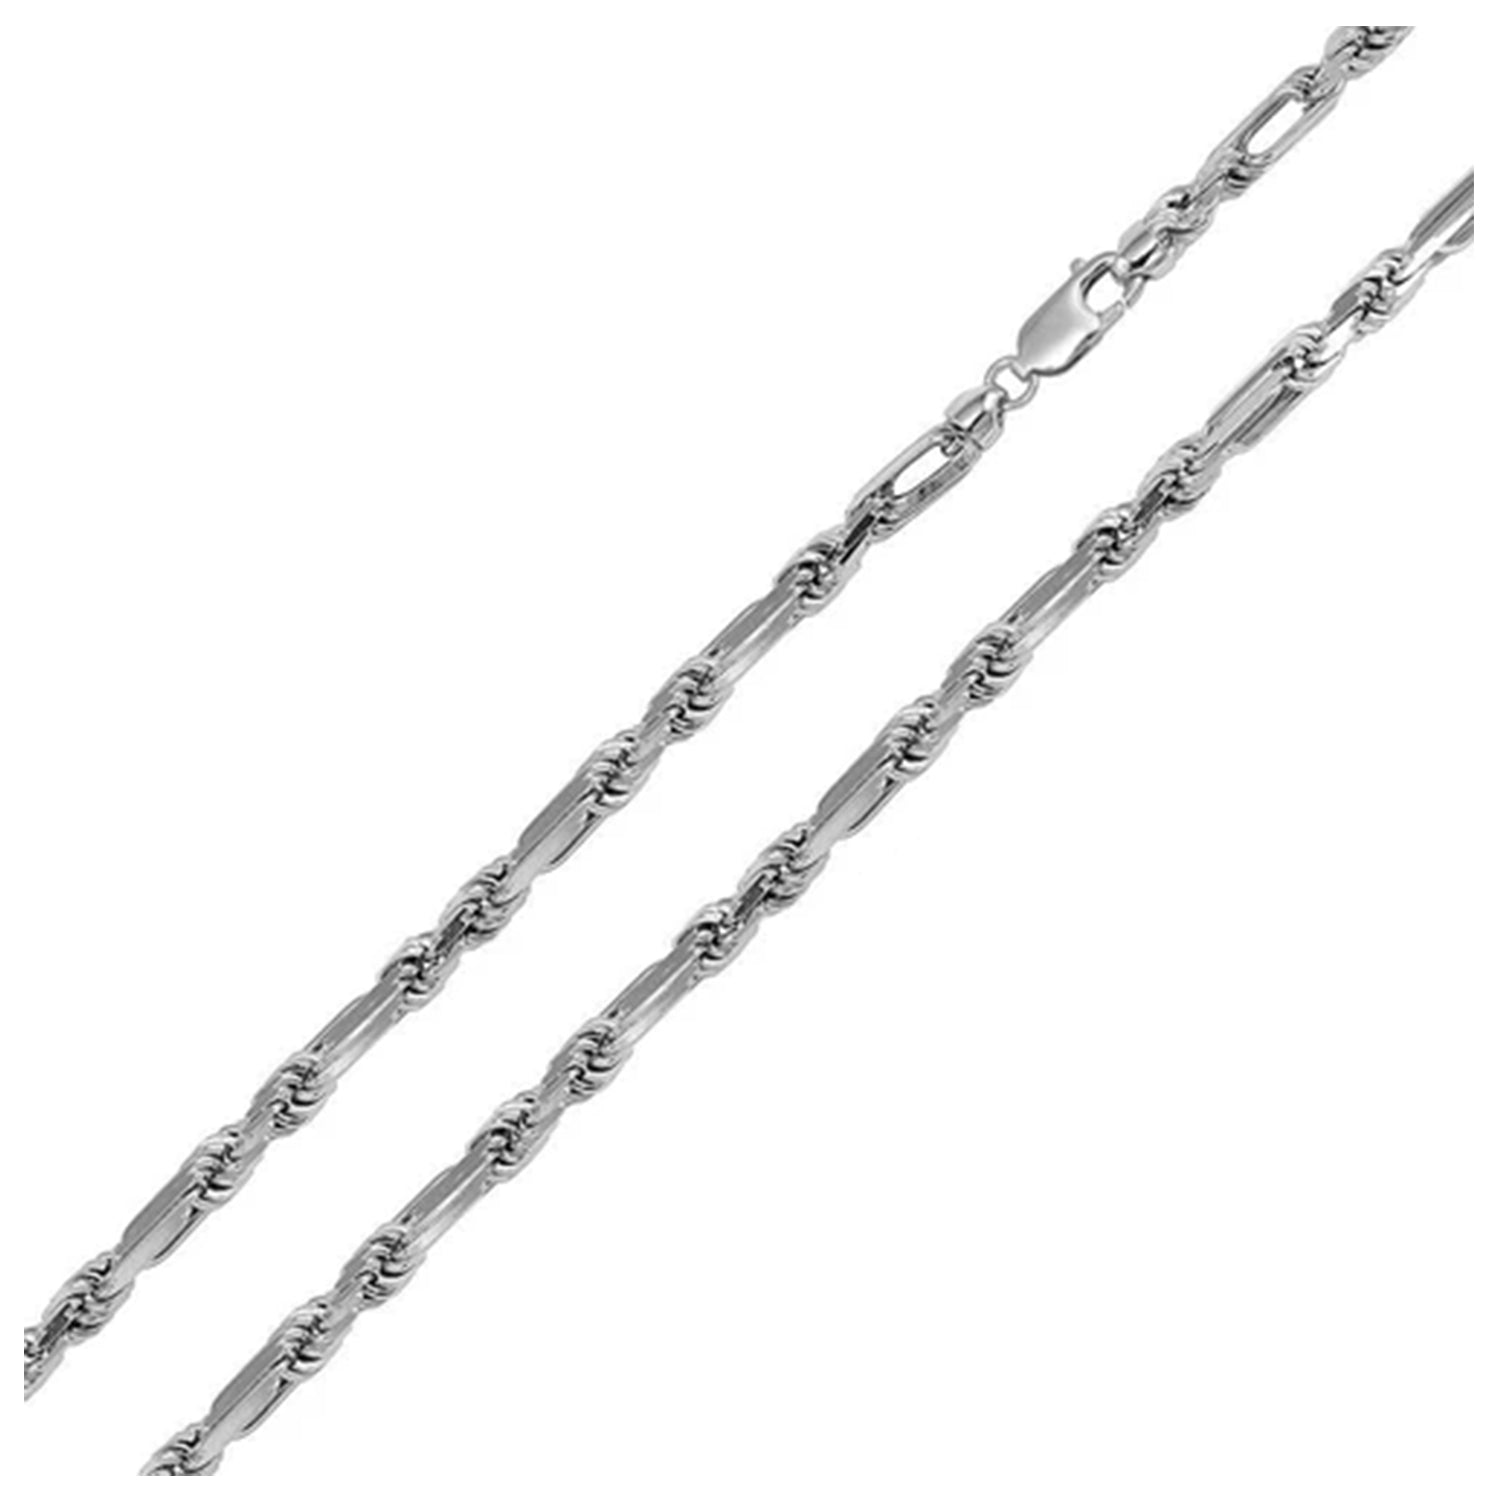 Sterling Silver 4.6 mm FigaRope Chain